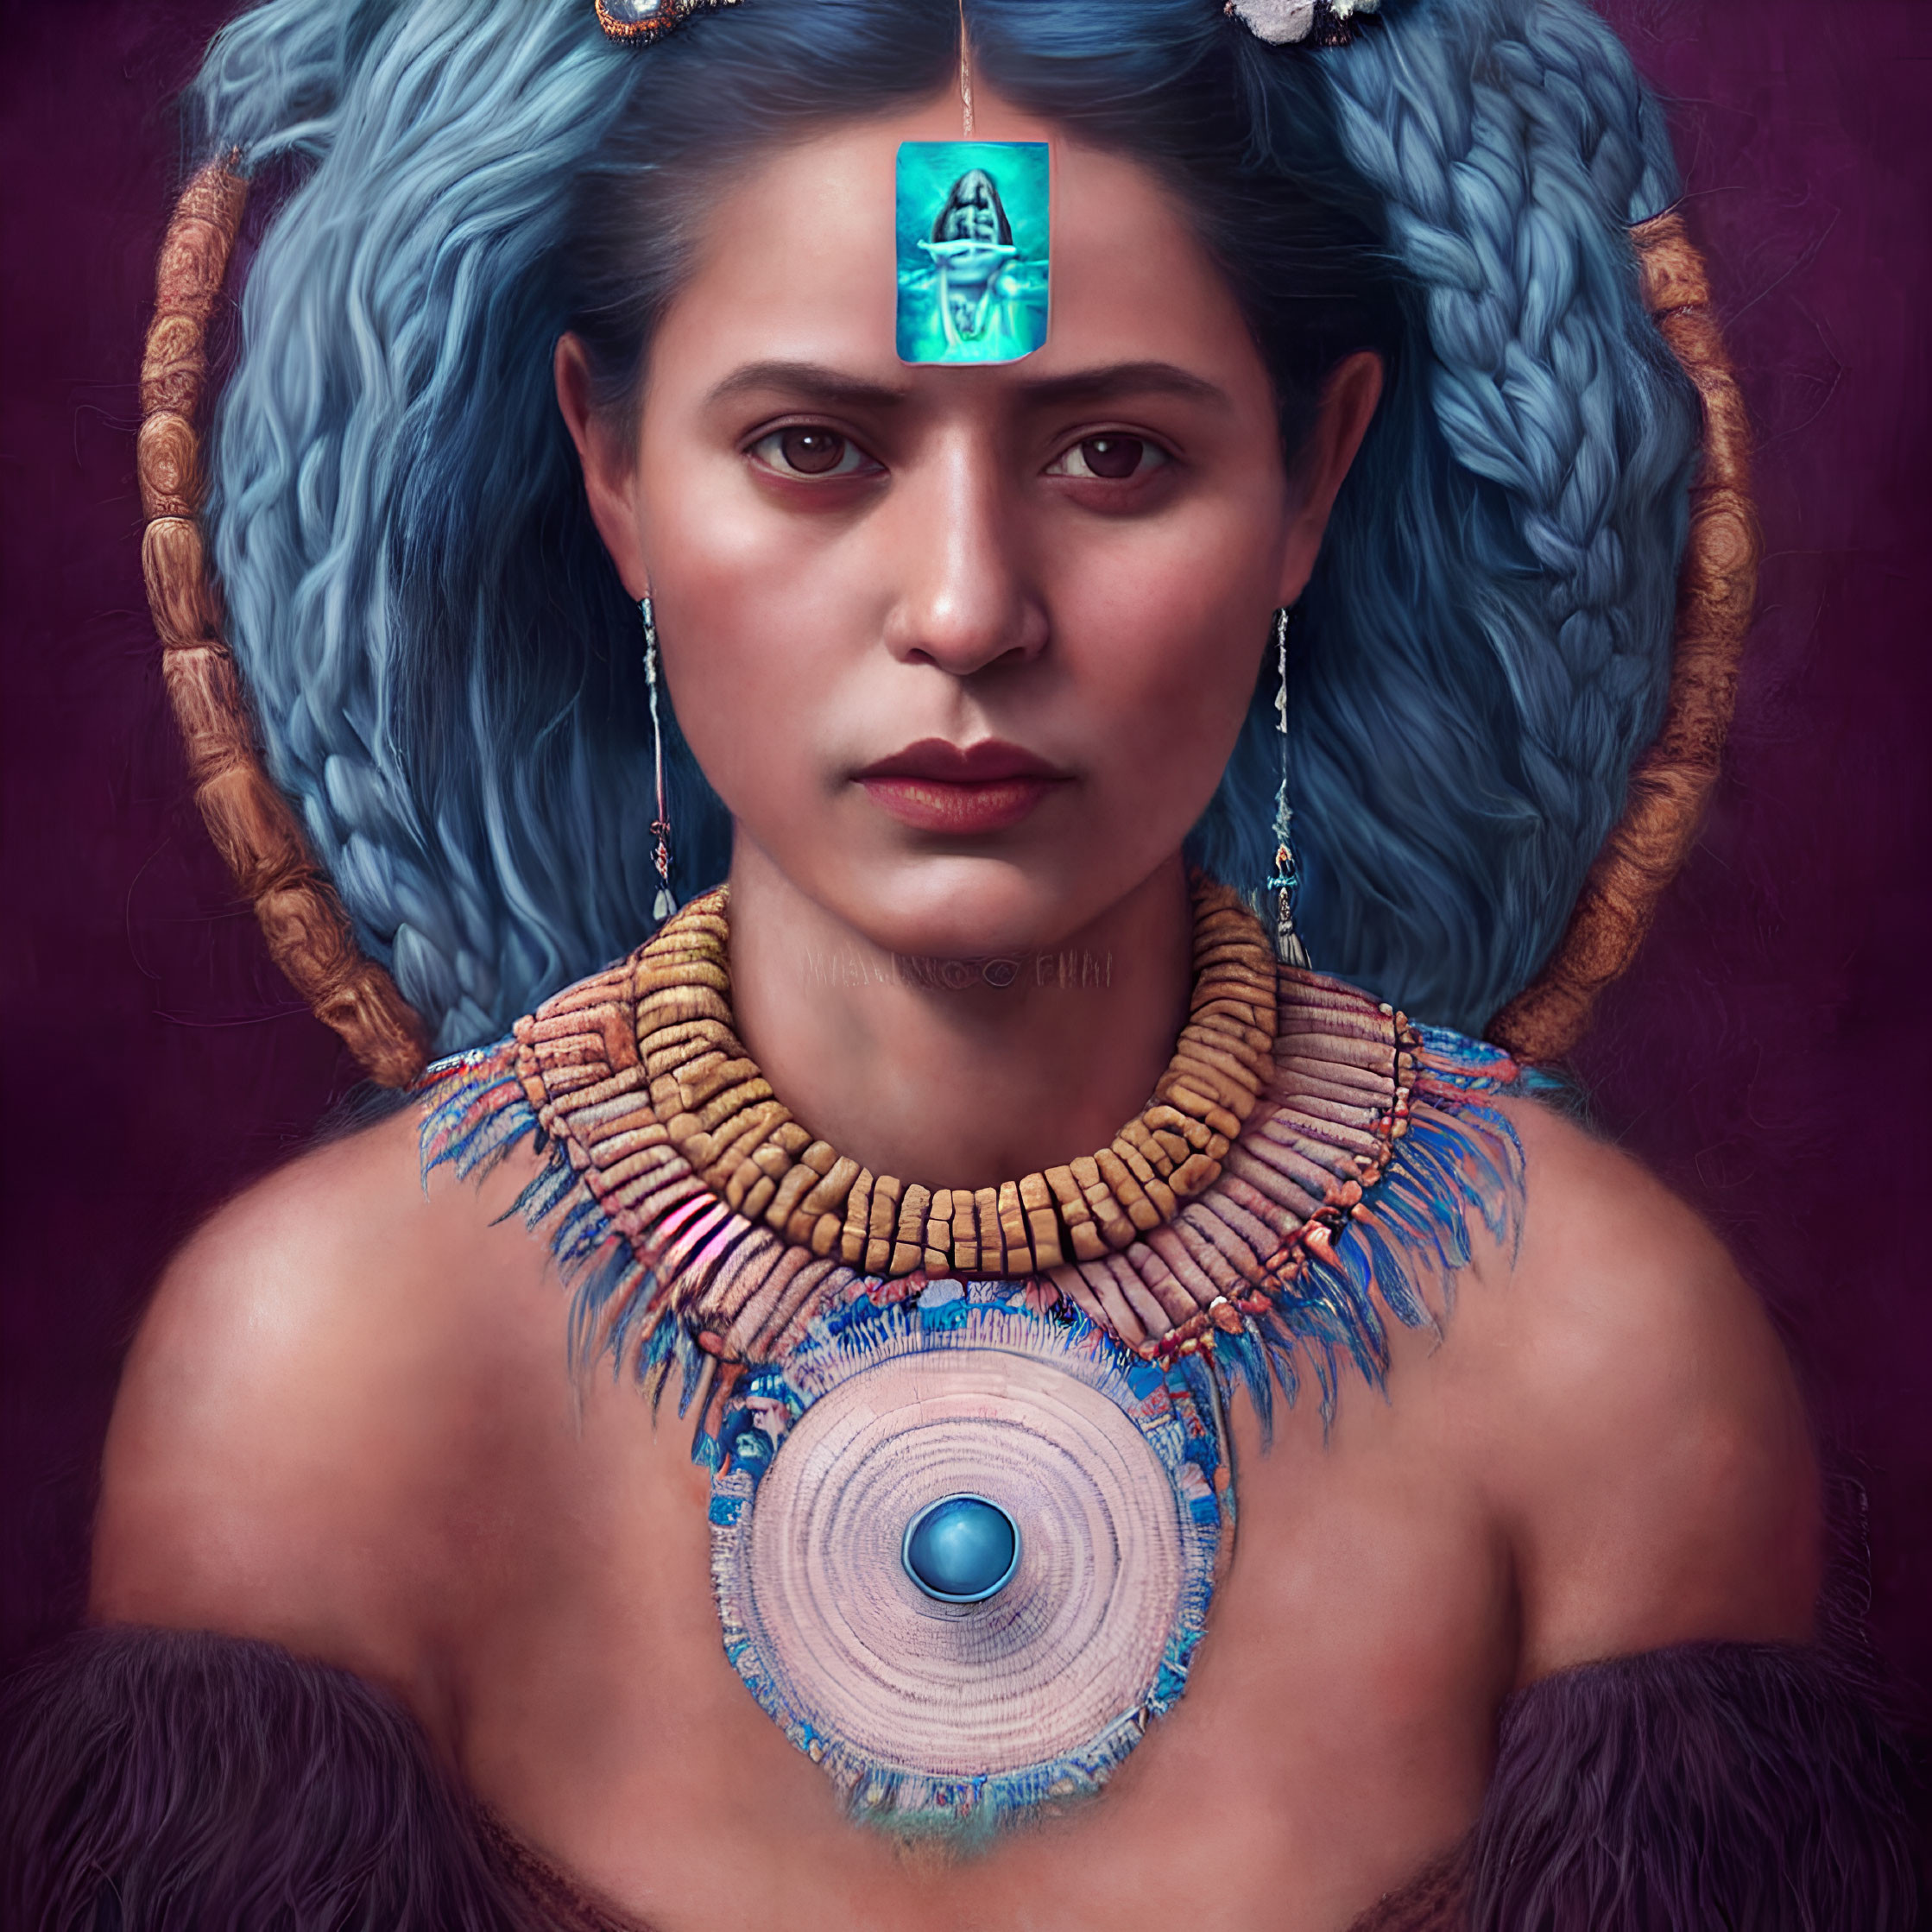 Digital artwork featuring woman with blue hair and glowing figure on forehead in purple background